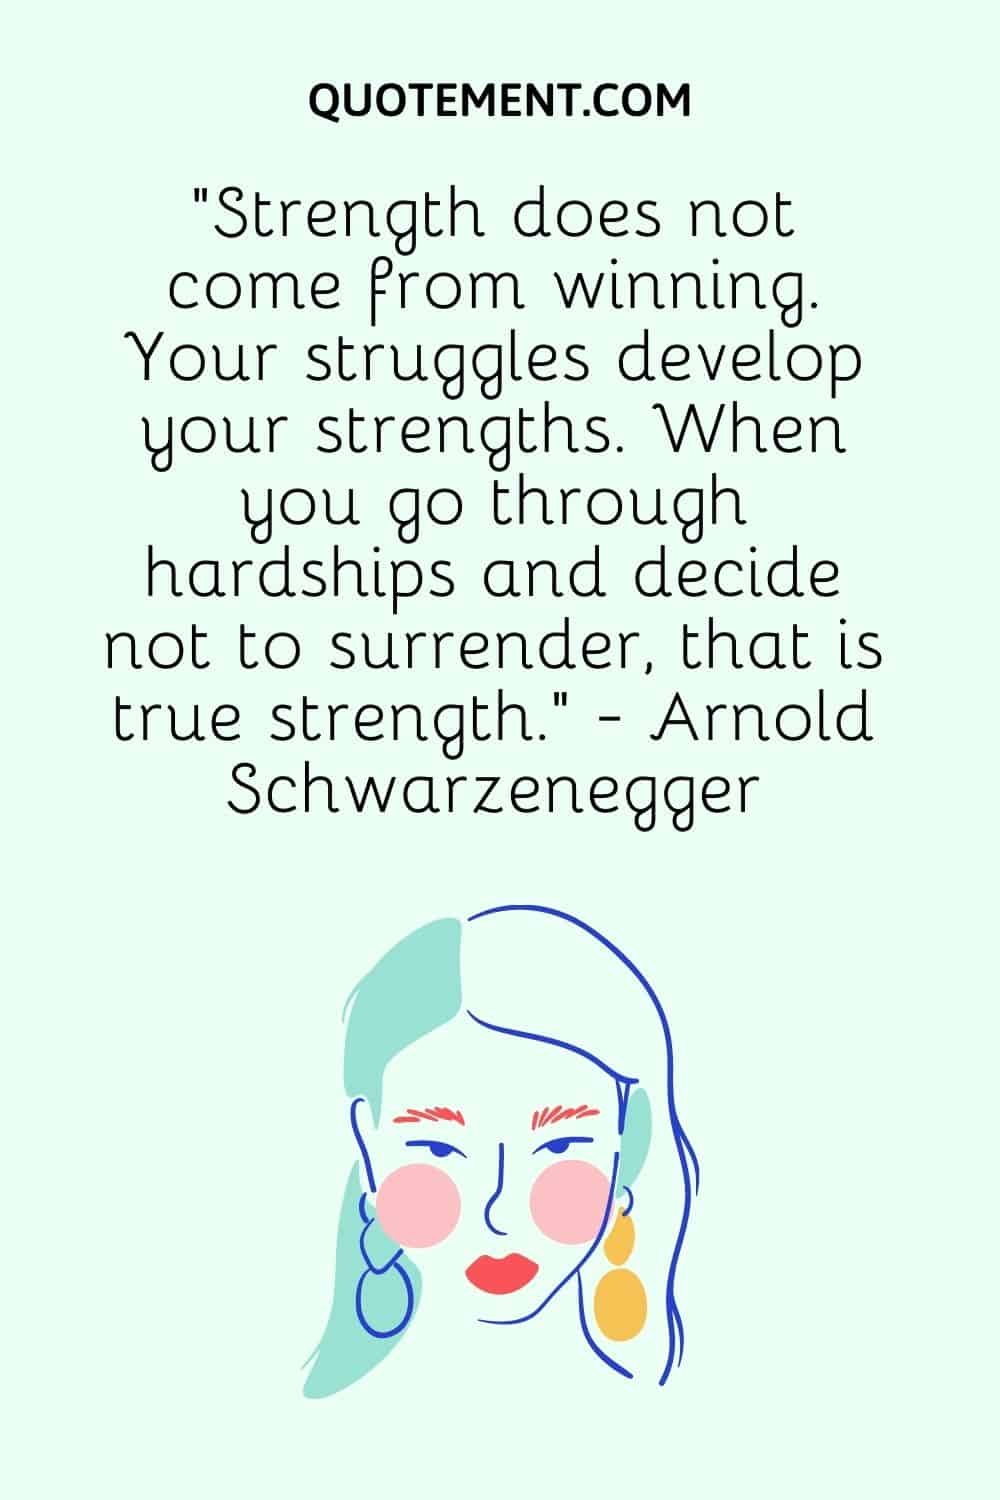 Strength does not come from winning. Your struggles develop your strengths.